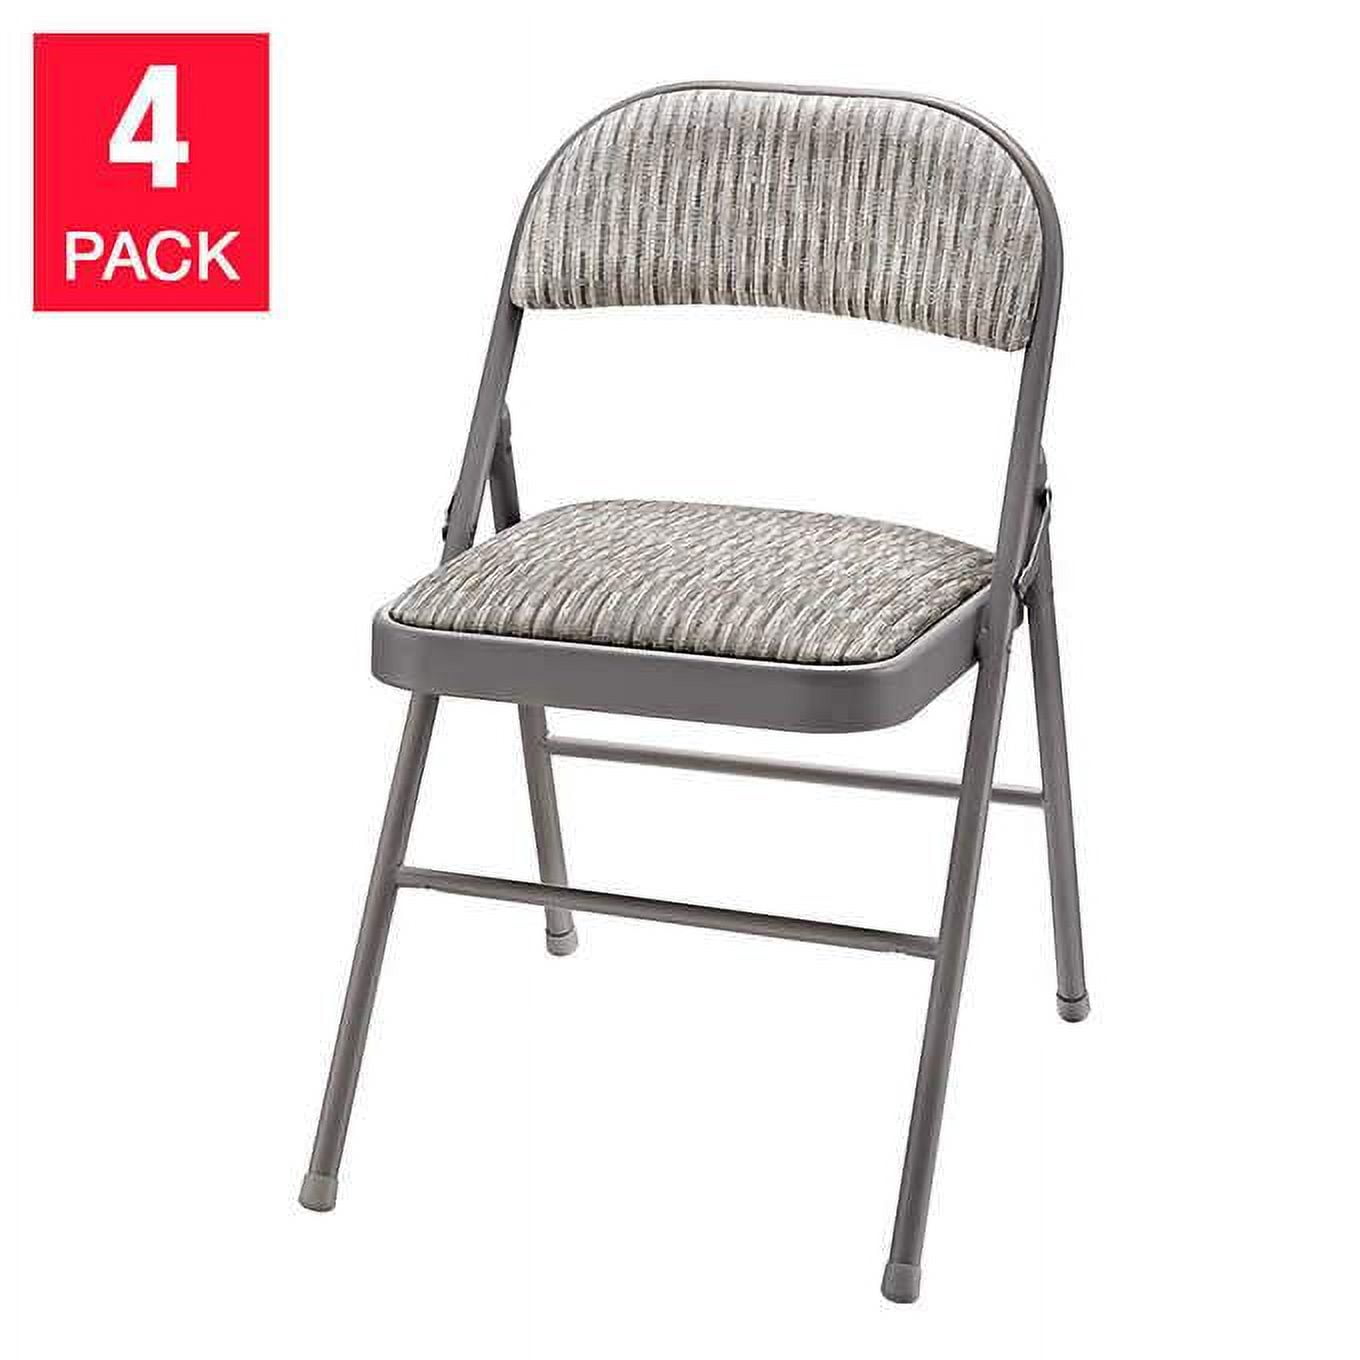 Maxchief Upholstered Padded Folding Chair, 4-pack